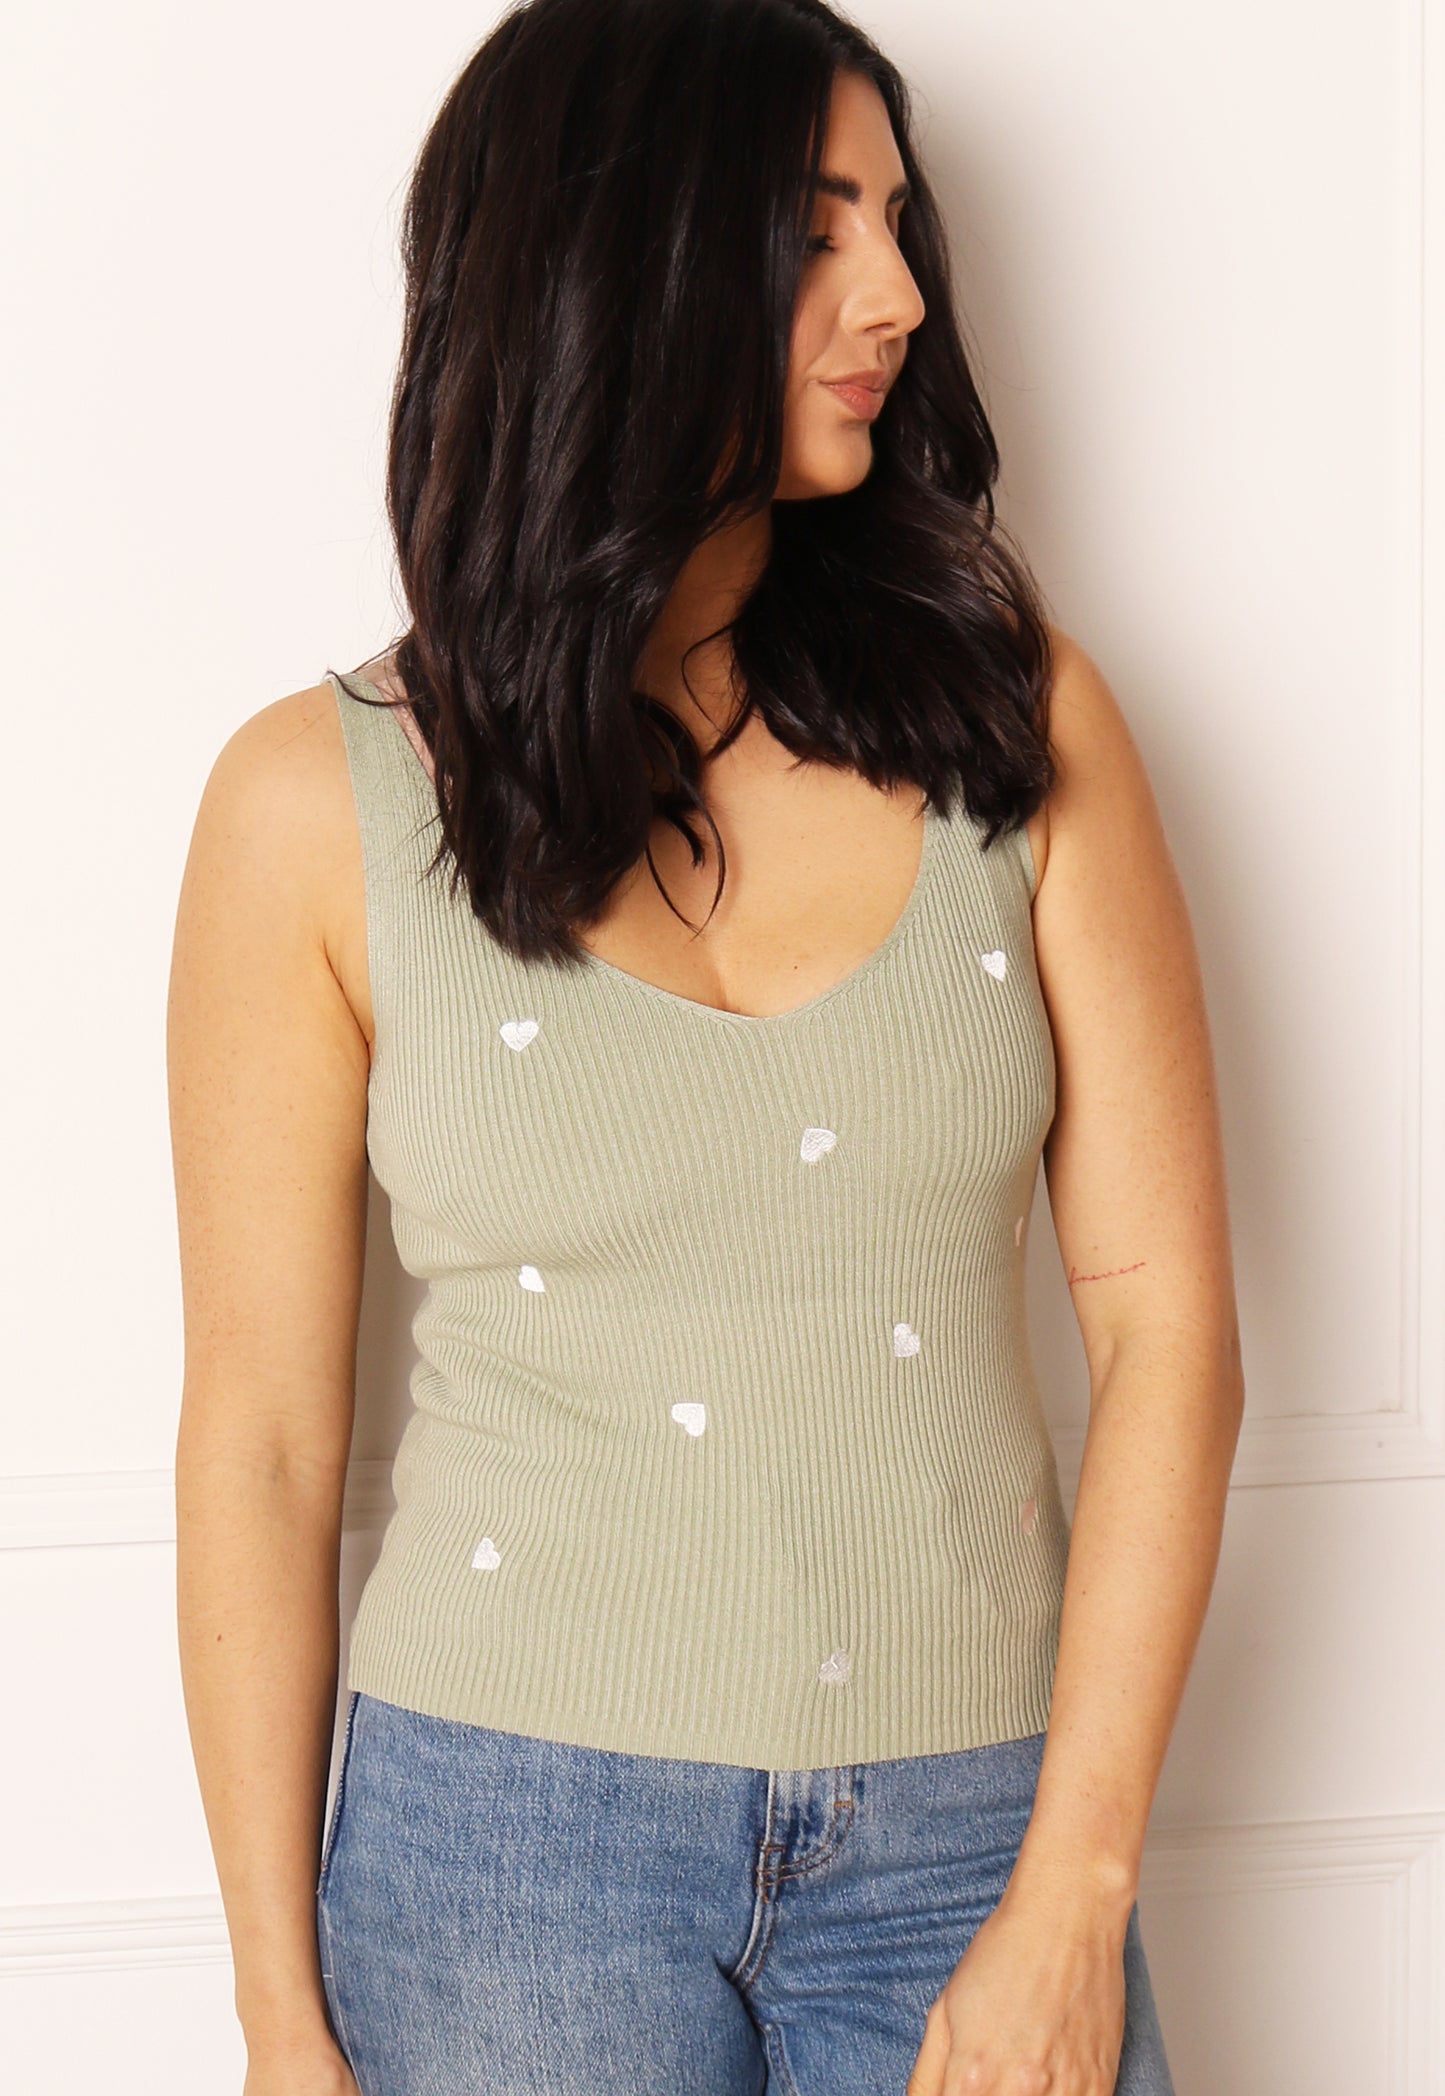 JDY Heart Embroidered Ribbed Knit V Neck Tank Top Vest in Sage Green & White - concretebartops